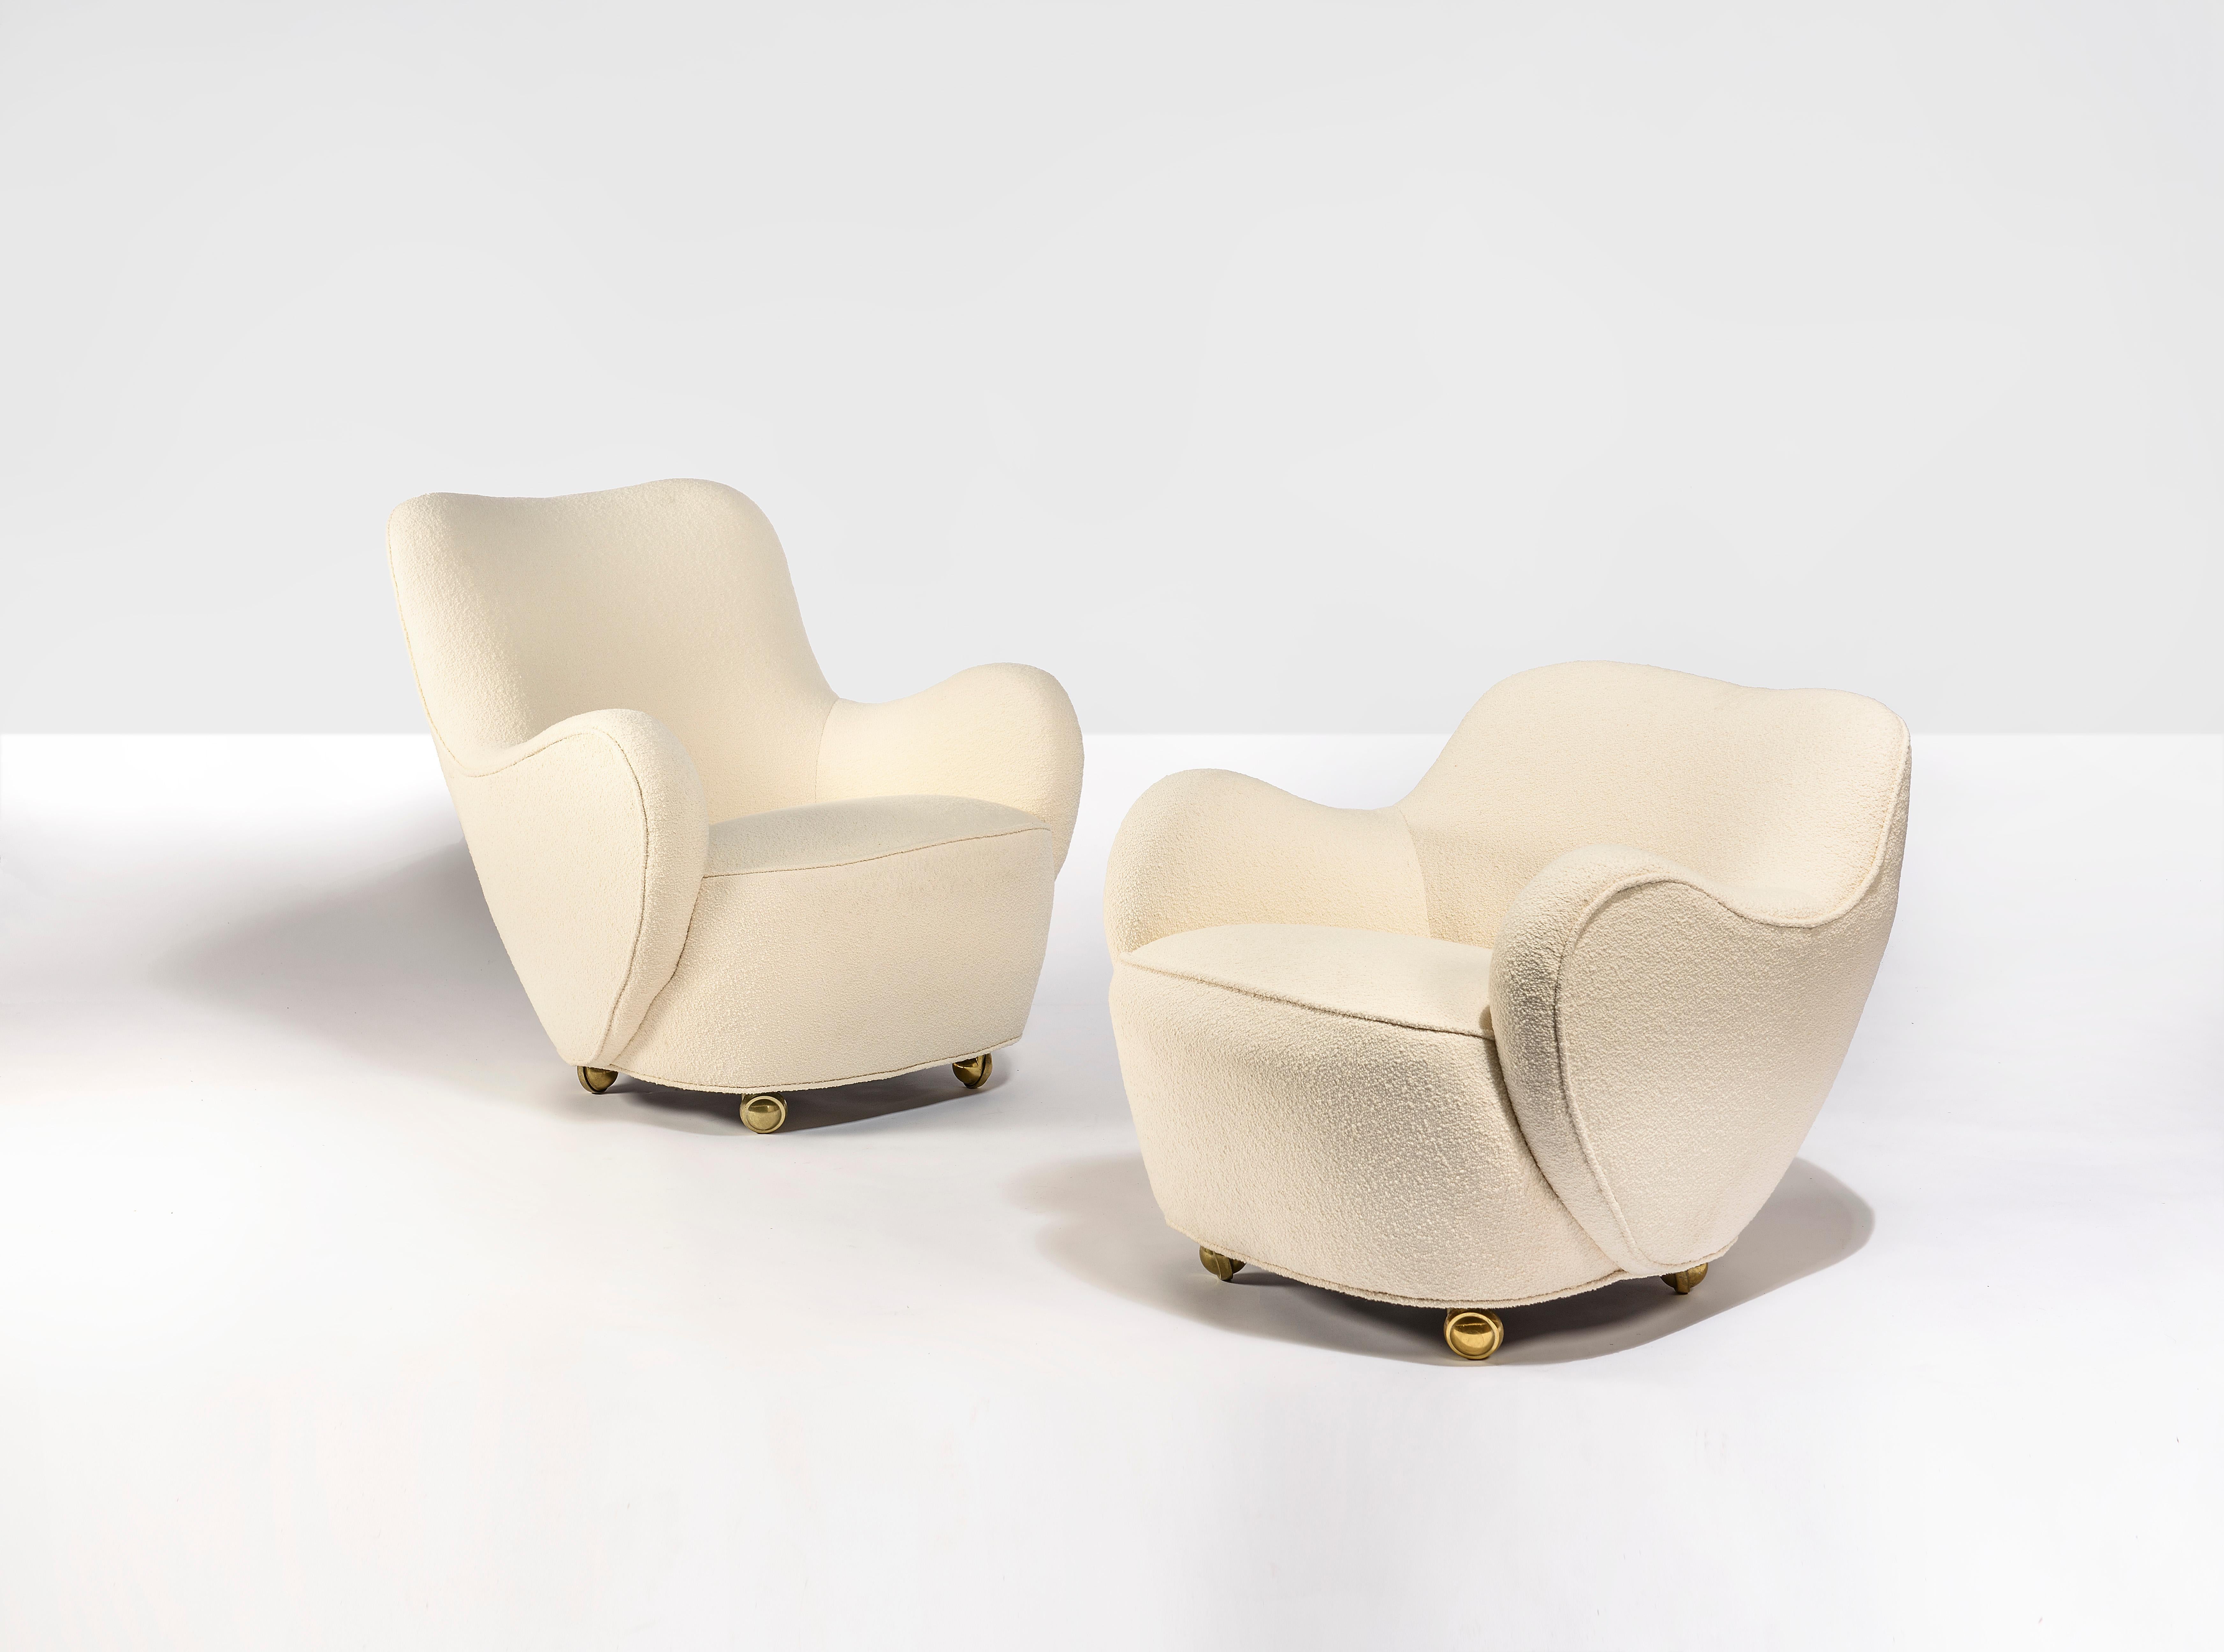 American High and Low Backed Fireside Lounge Chairs by Vladimir Kagan